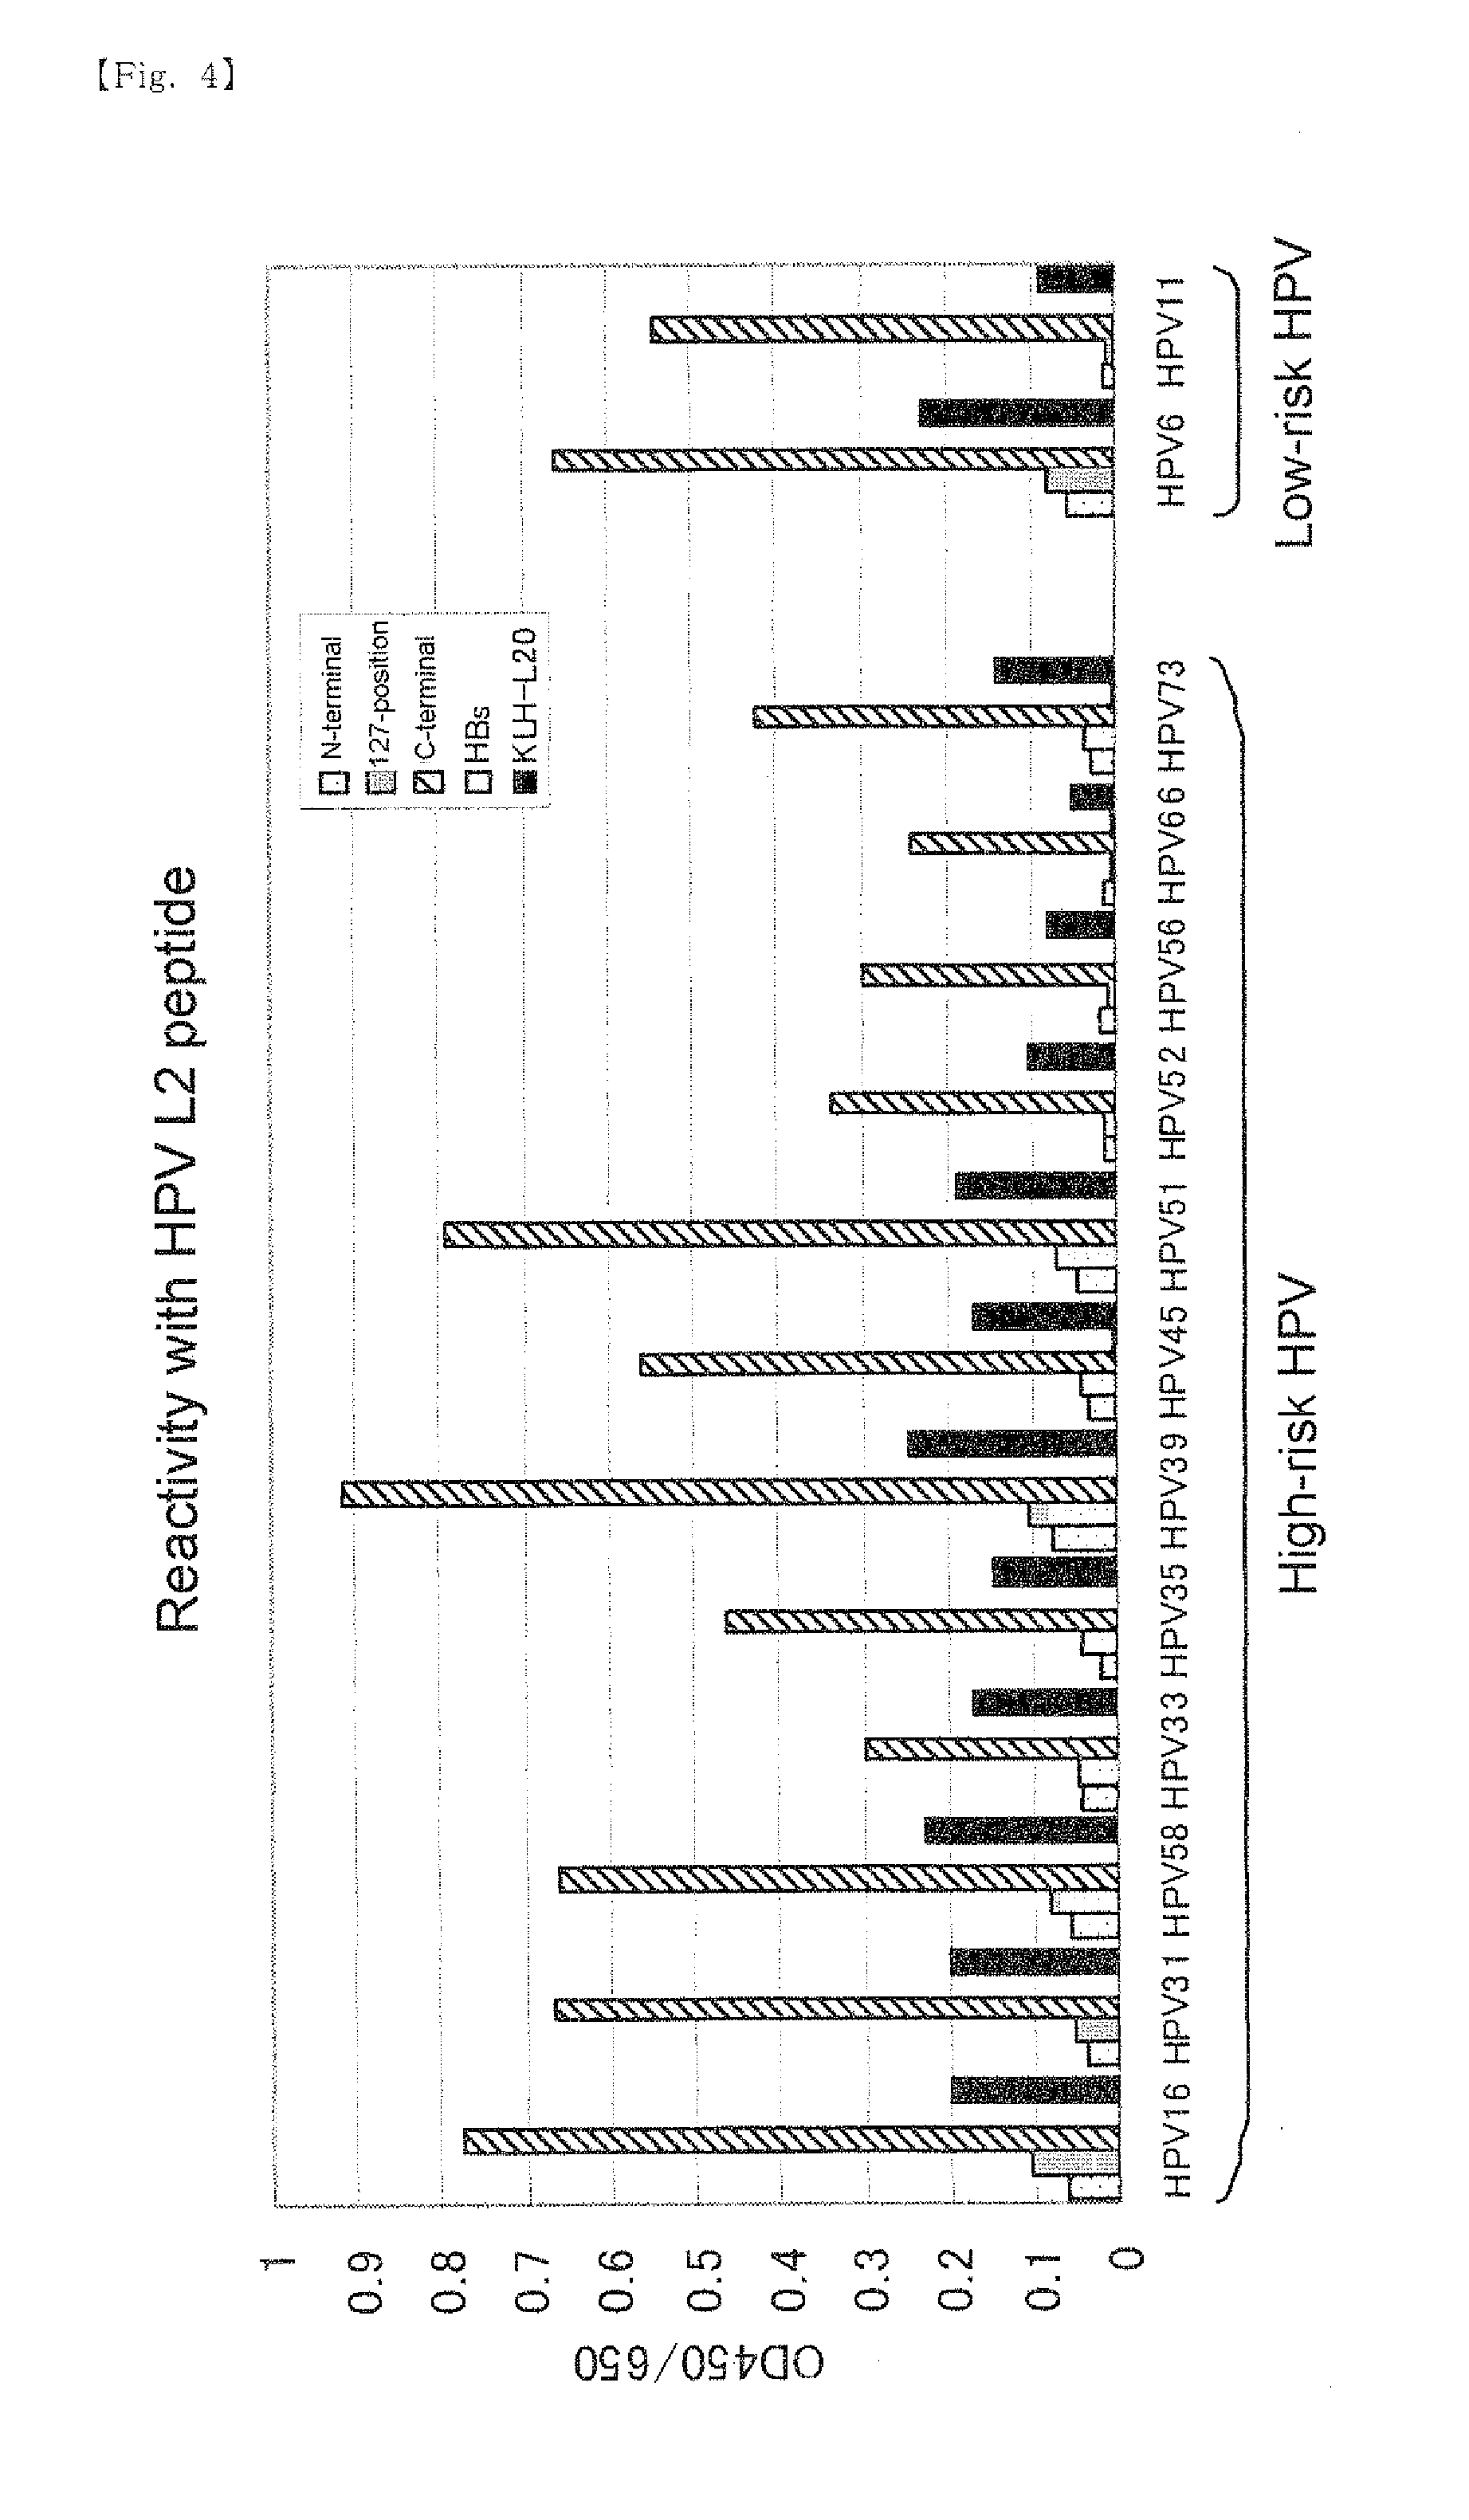 Vaccine for HPV infection and/or hepatitis b comprising HPV/hbs chimeric protein as active ingredient